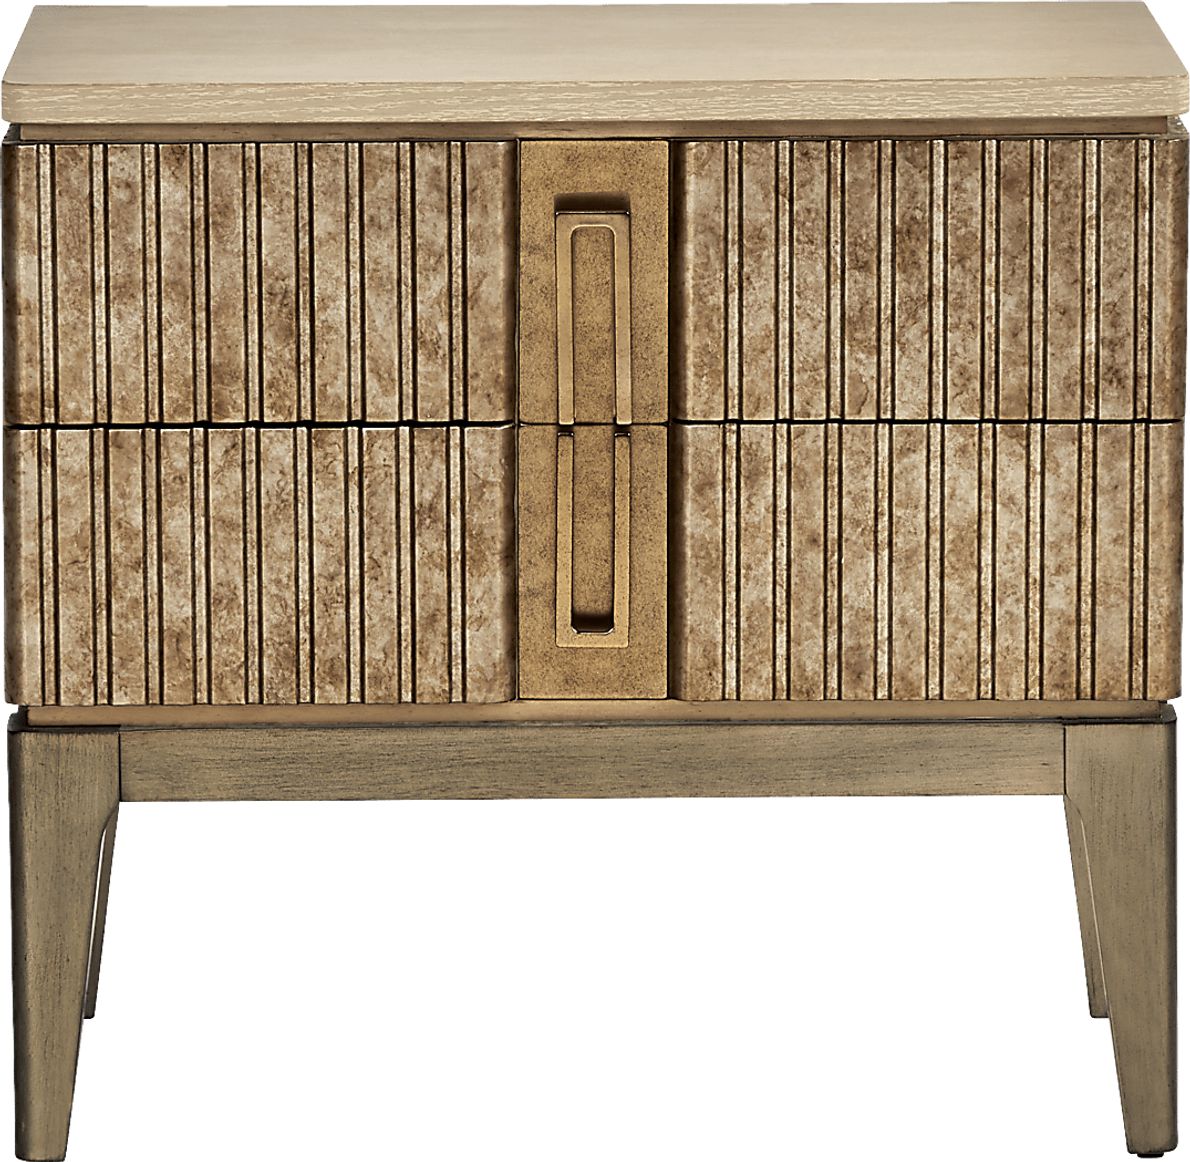 Issabela Caramel Accent Nightstand